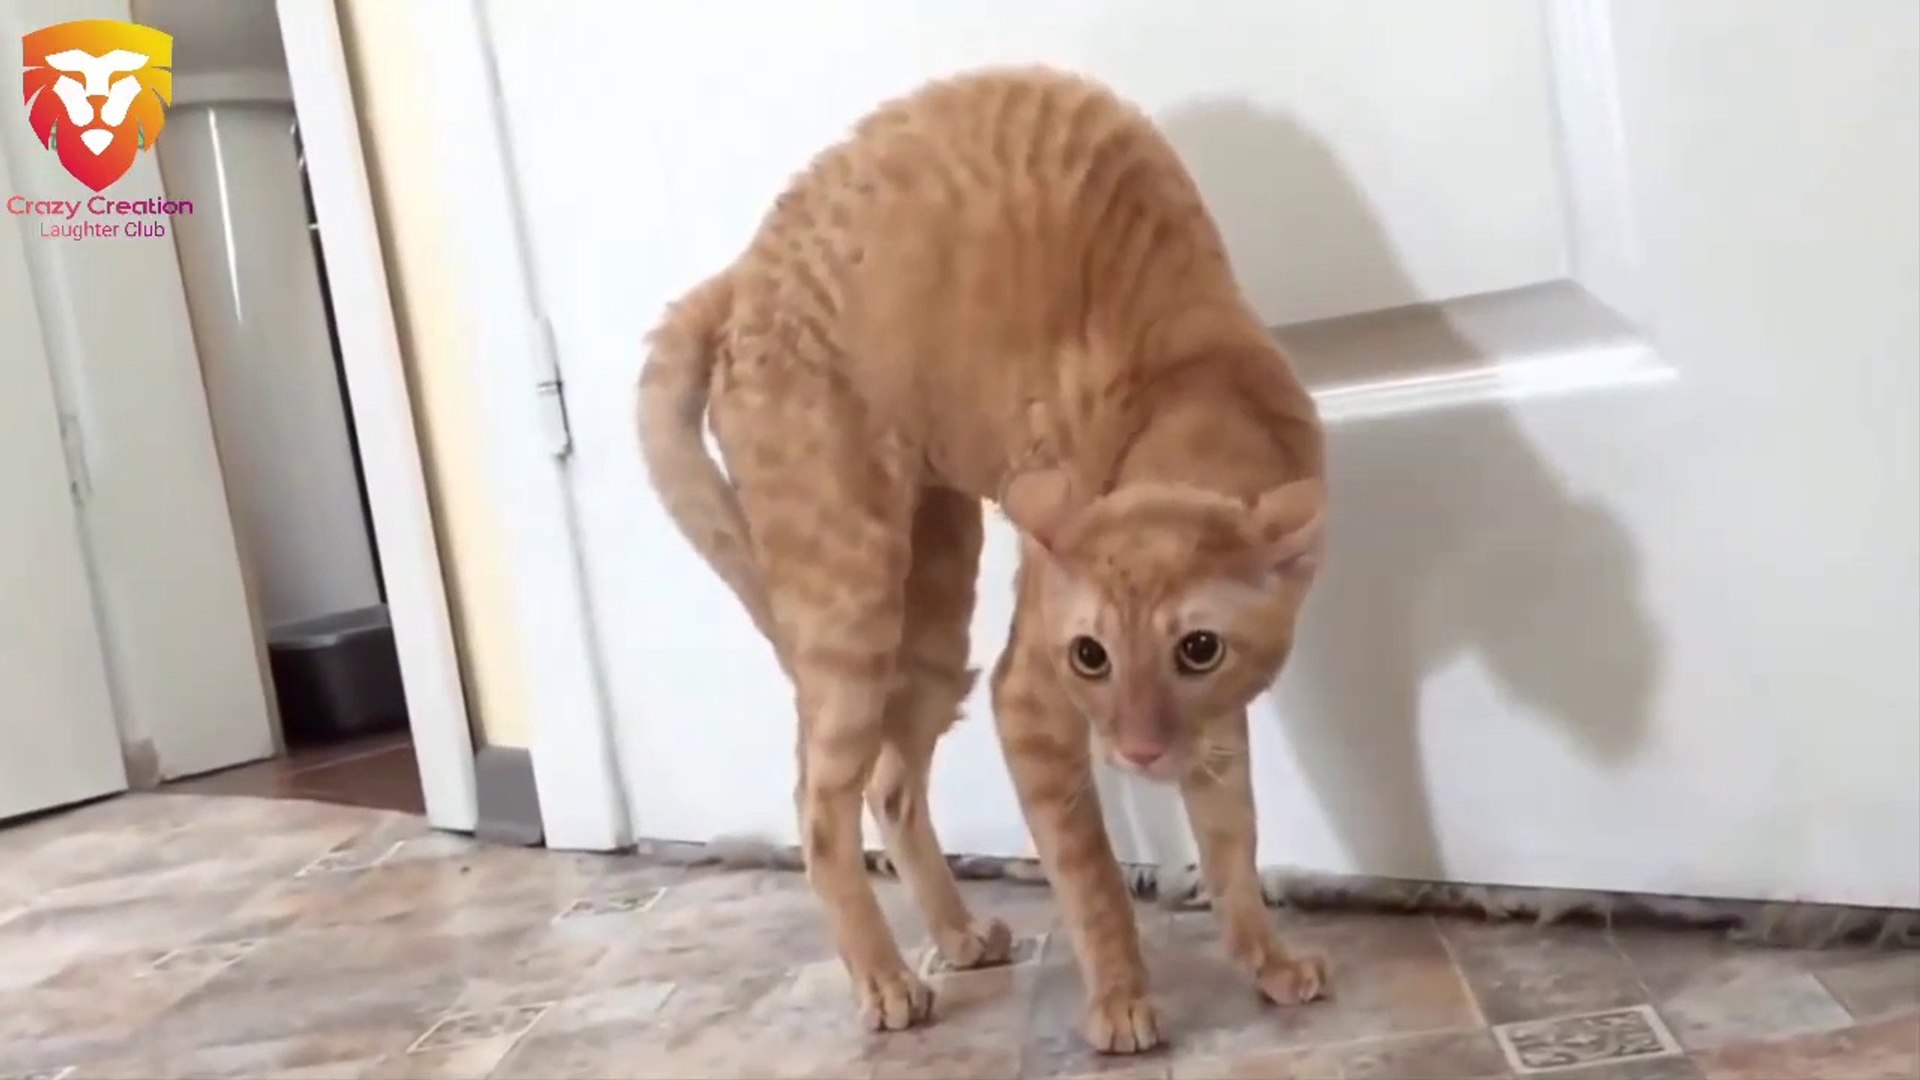 Best Scared Cats Compilation 2015 - FUNNY CATS 